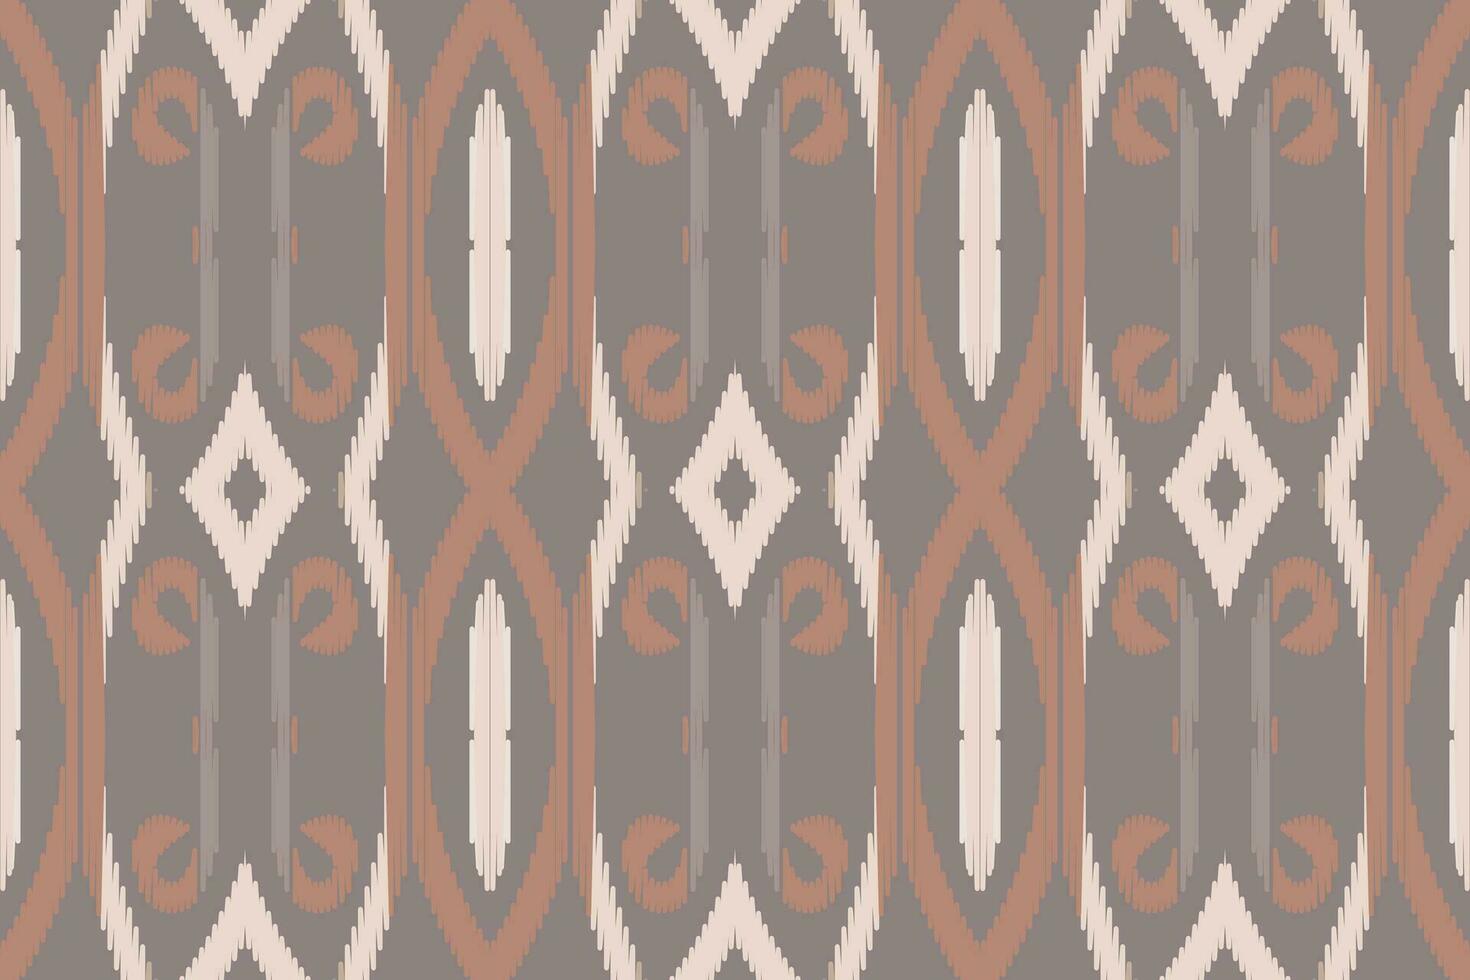 Motif Ikat Seamless Pattern Embroidery Background. Ikat Damask Geometric Ethnic Oriental Pattern traditional.aztec Style Abstract Vector design for Texture,fabric,clothing,wrapping,sarong.